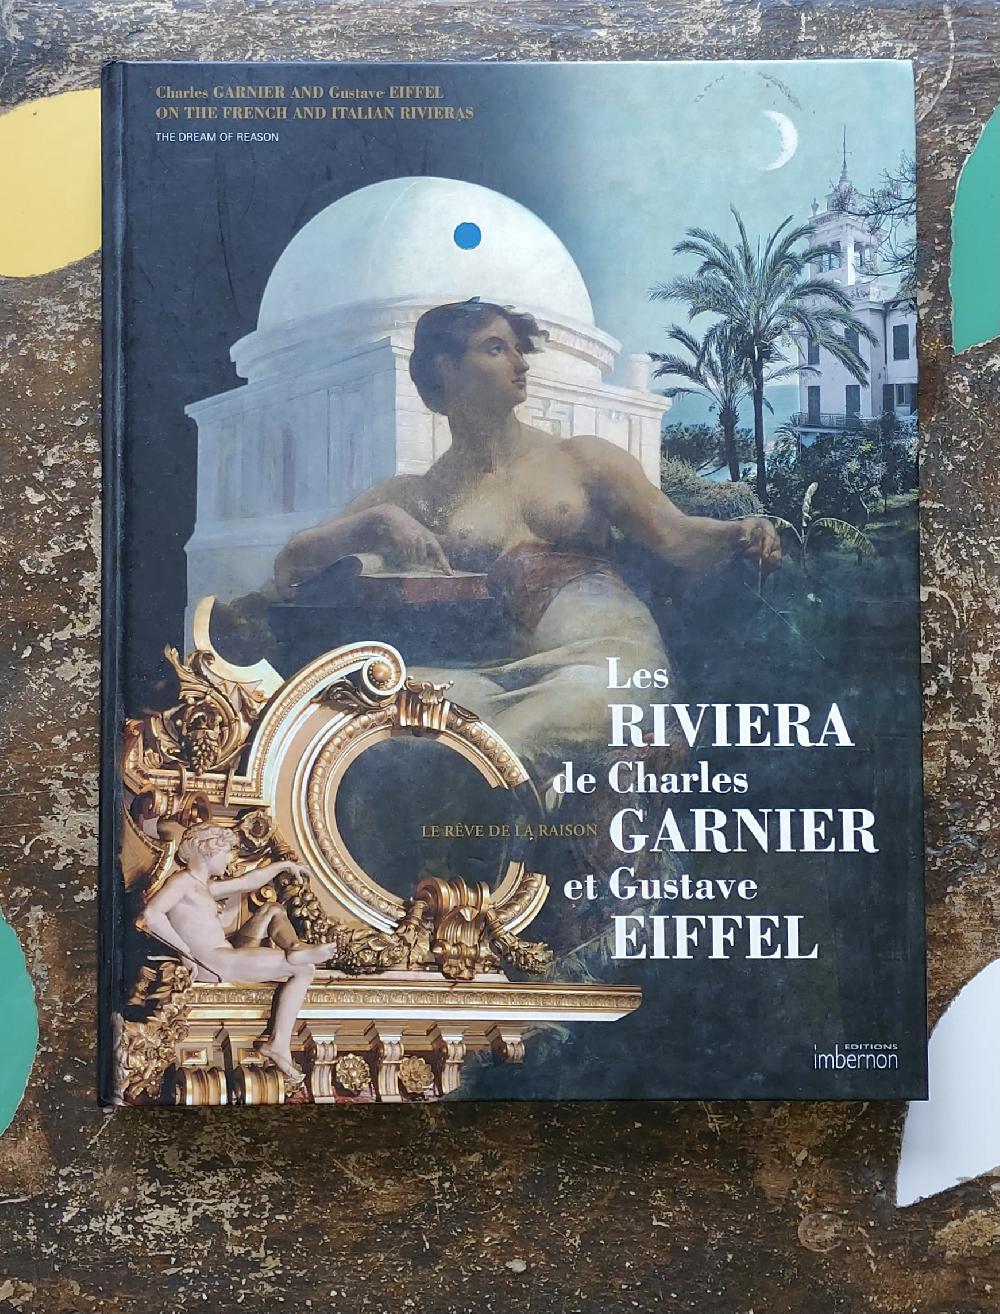 Charles Garnier and Gustave Eiffel on French and Italian Rivieras: The Dream of Reason